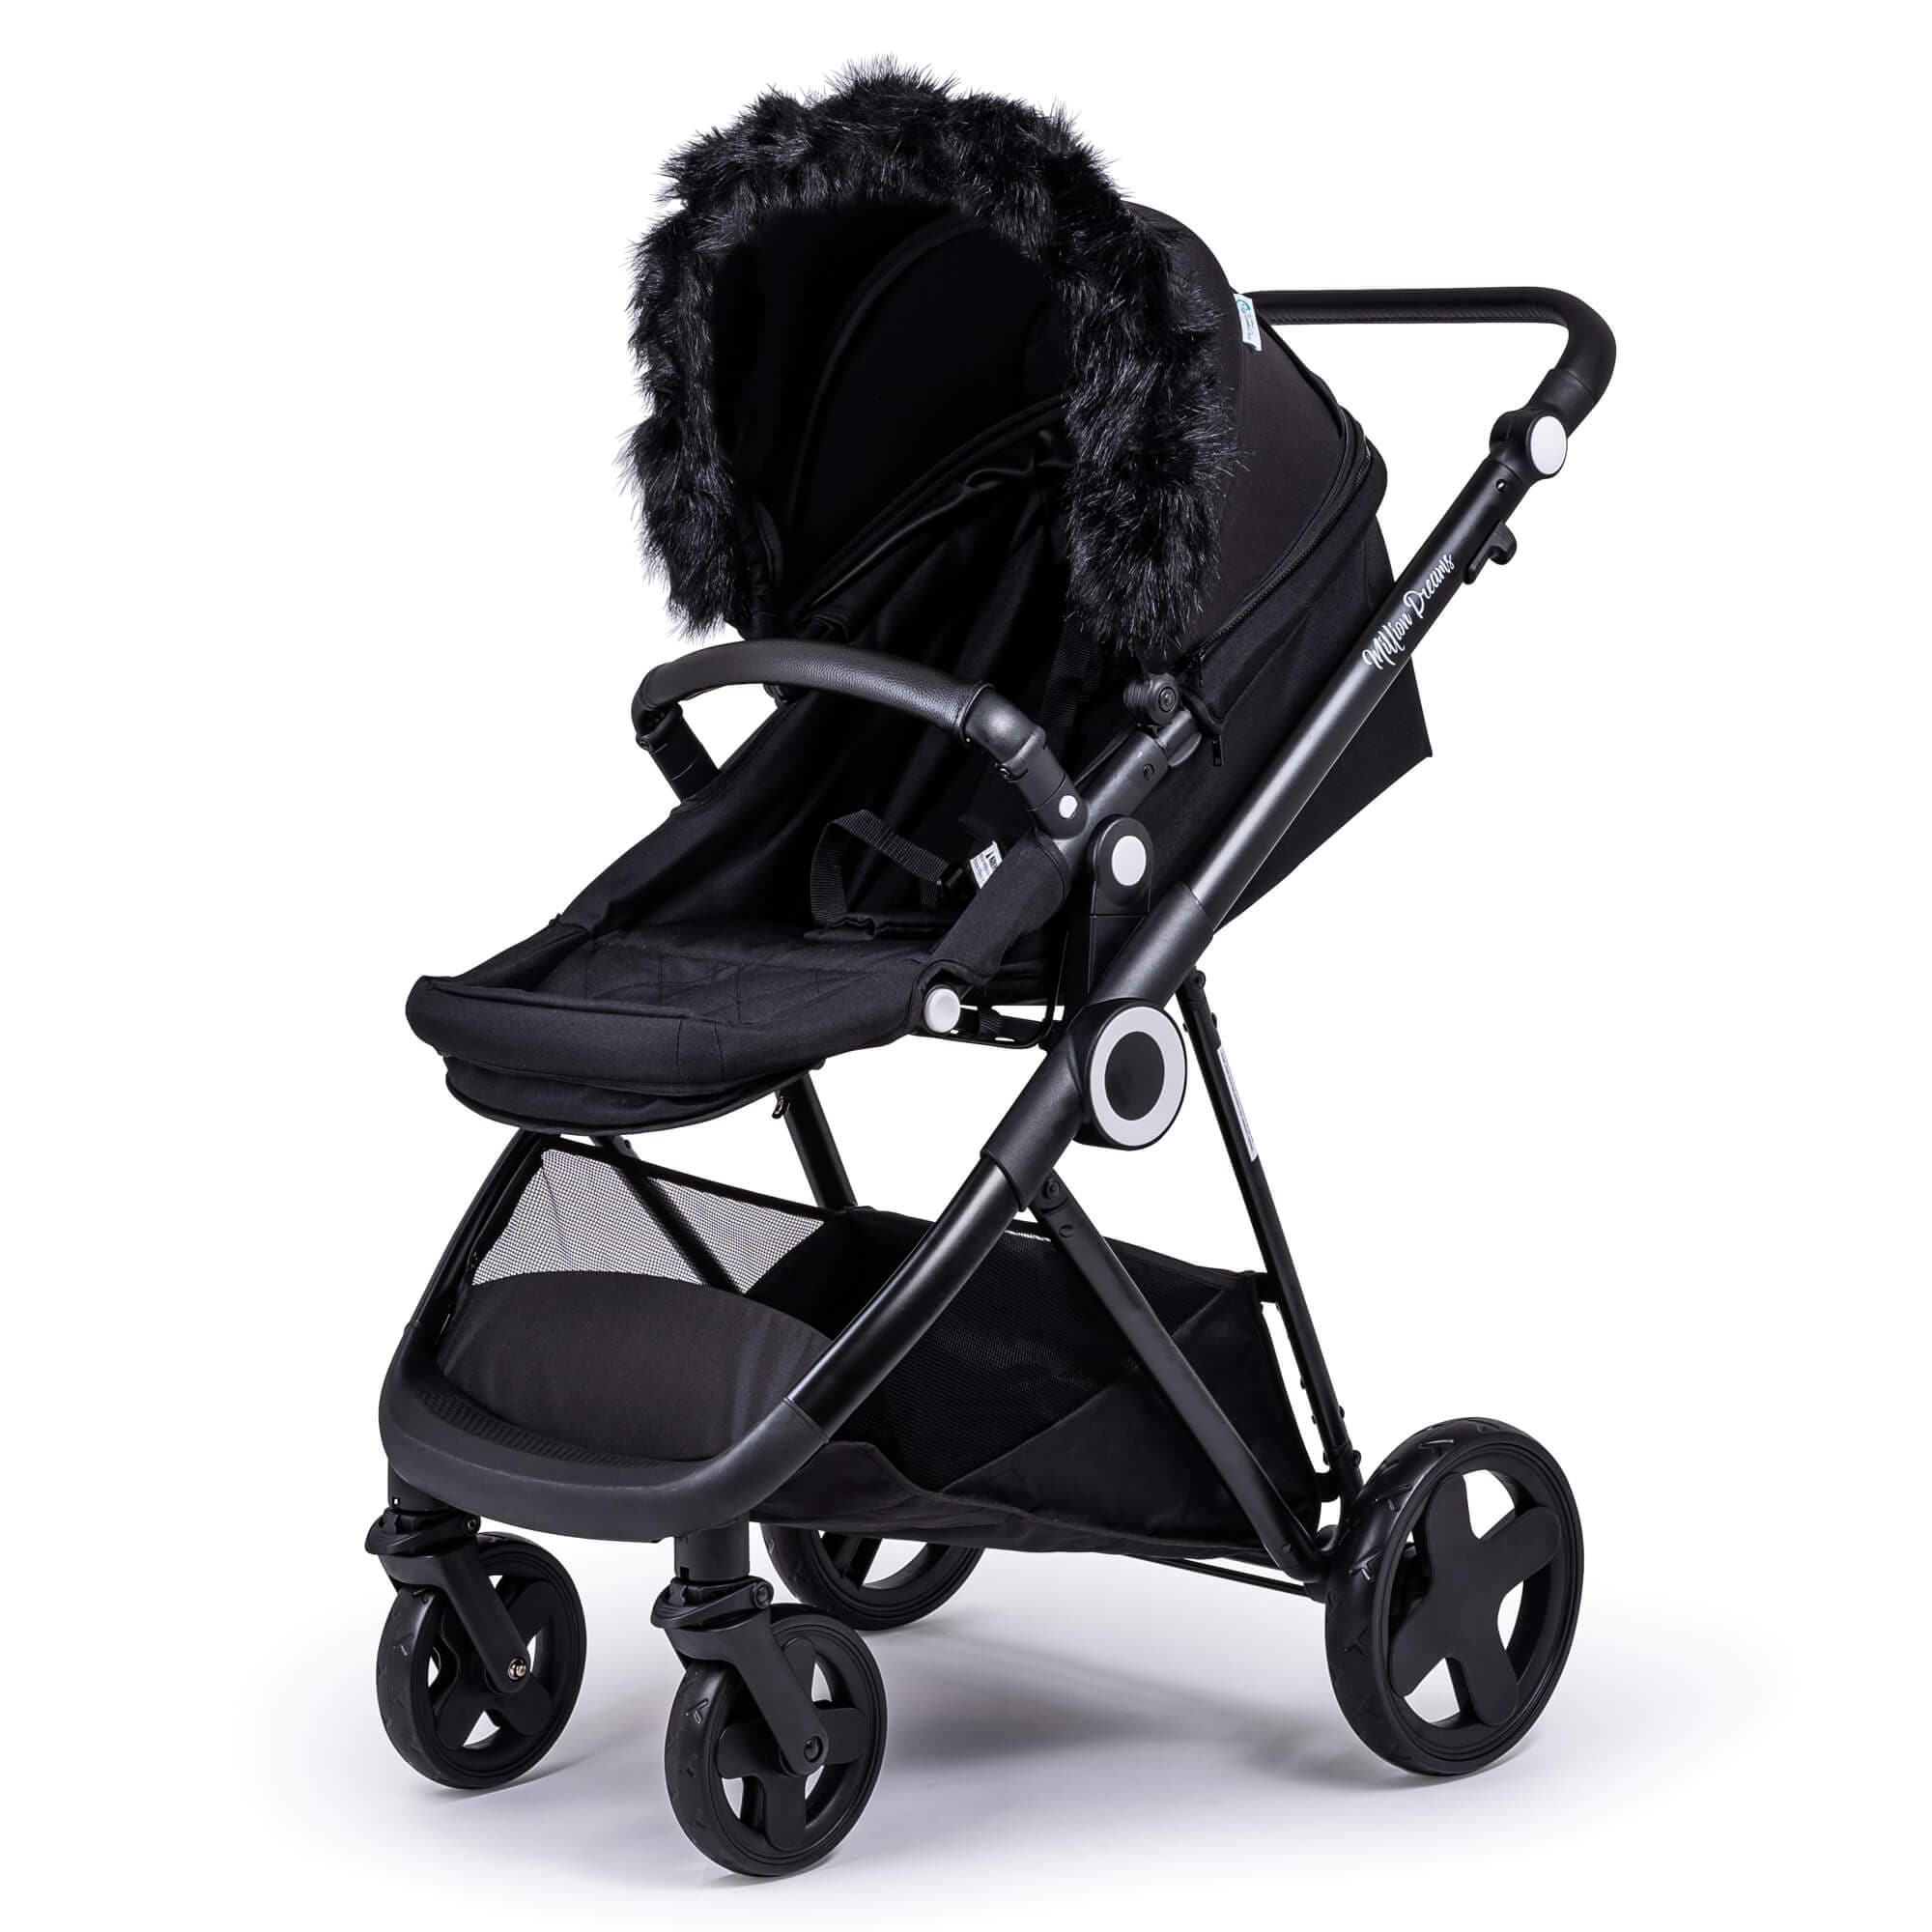 Pram Fur Hood Trim Attachment for Pushchair Compatible with Uppababy - Black / Fits All Models | For Your Little One